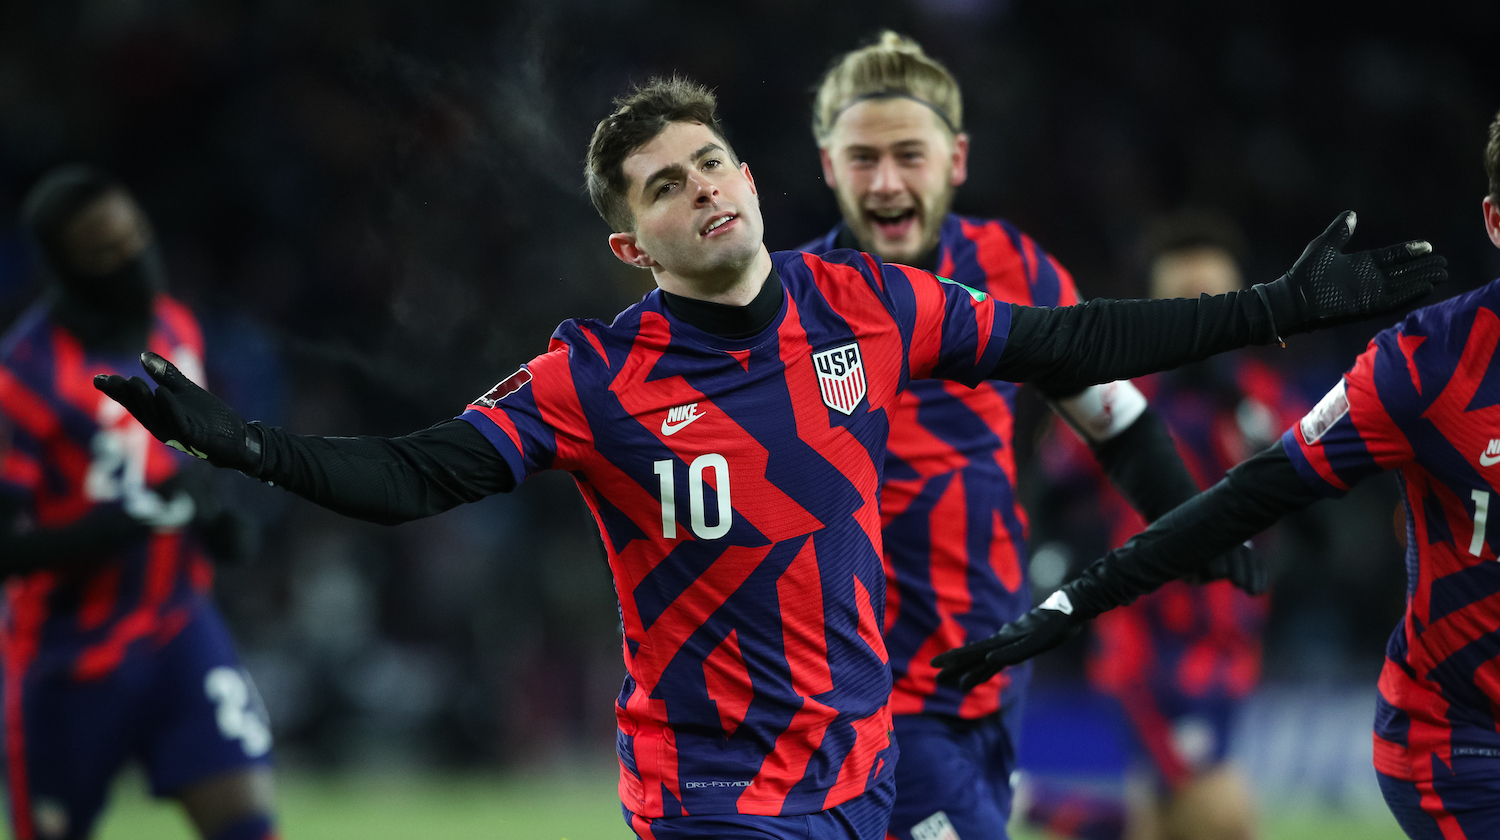 ST. PAUL, MN - FEBRUARY 02: Christian Pulisic #10 of the United States celebrates after scoring a goal against Honduras in the second half of a World Cup Qualifying game at Allianz Field on February 2, 2022 in St. Paul, Minnesota. The United States defeated Honduras 3-0. (Photo by David Berding/Getty Images)